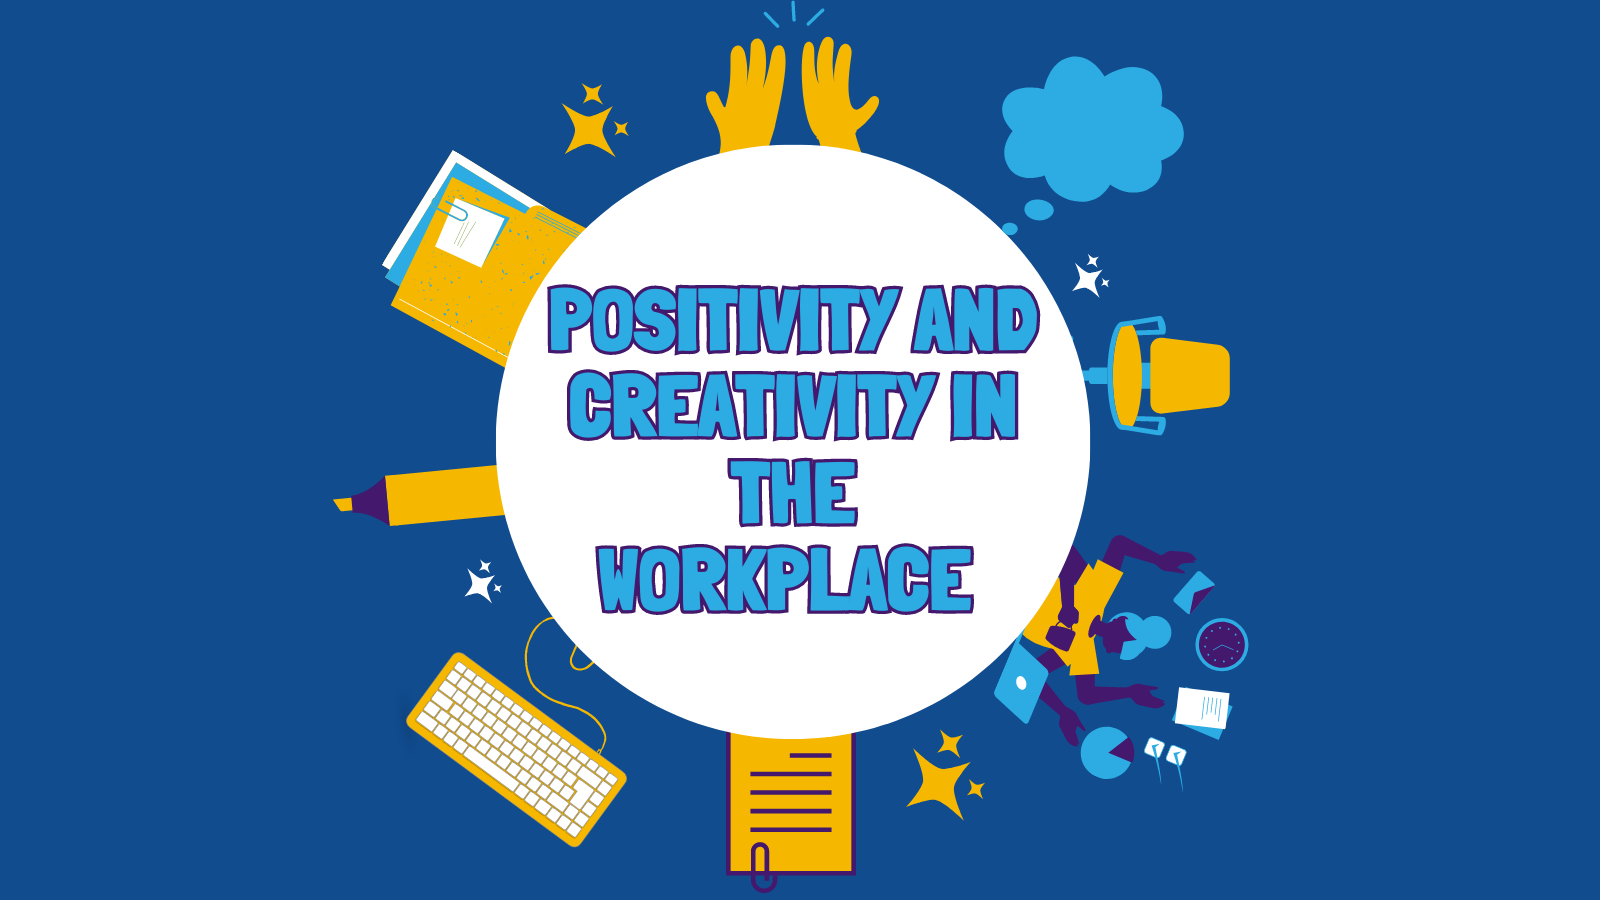 World Wellbeing Week-Jola on how to be positive and creative in the workplace!